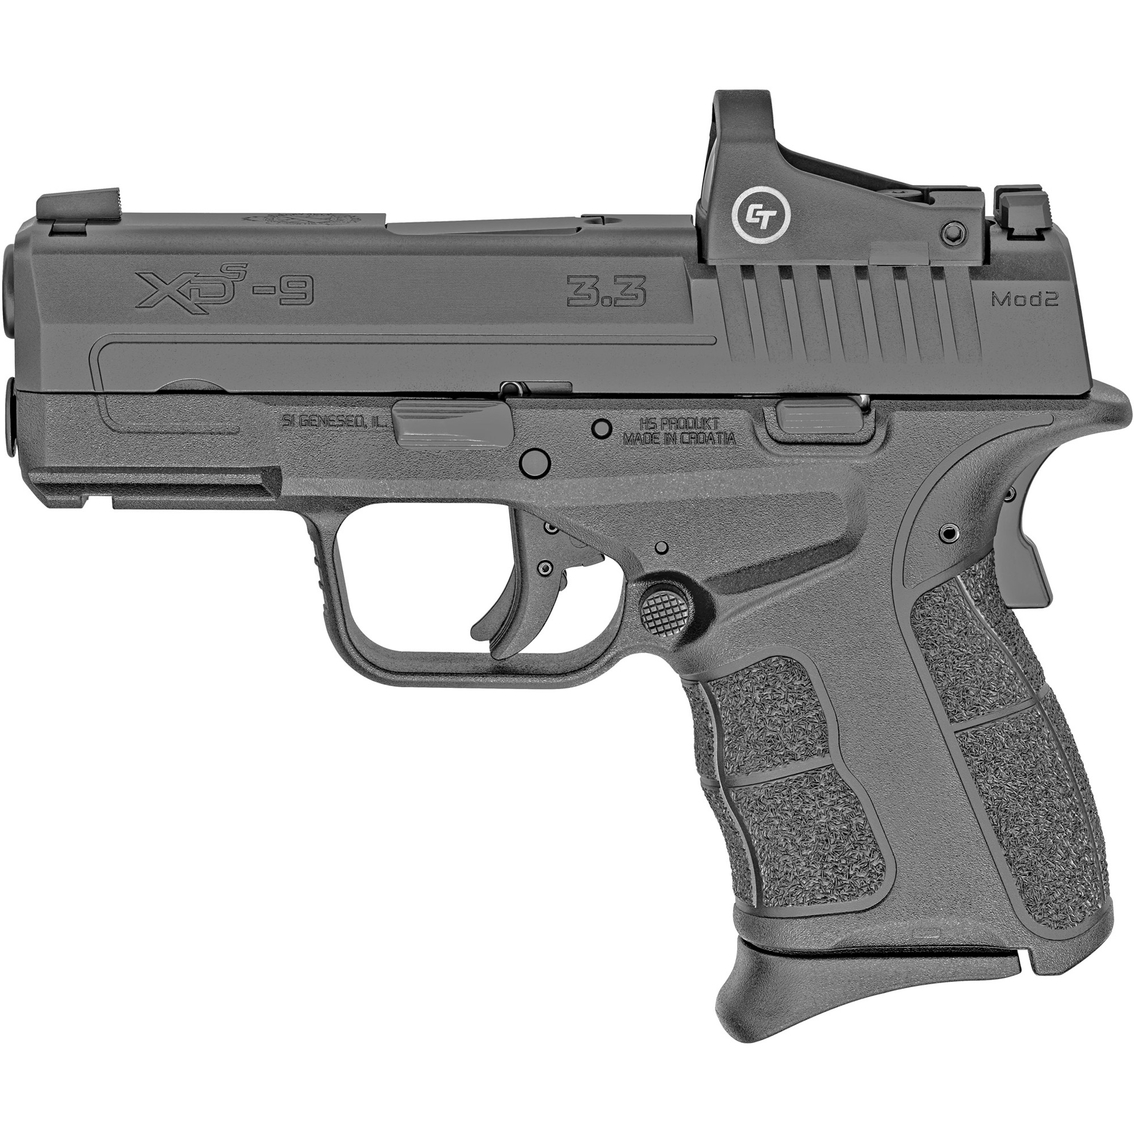 Springfield Armory XDS-Mod 2 OSP 9mm 3.3 in. Barrel & Red Dot 9 Rnd Pistol Black - Image 2 of 3